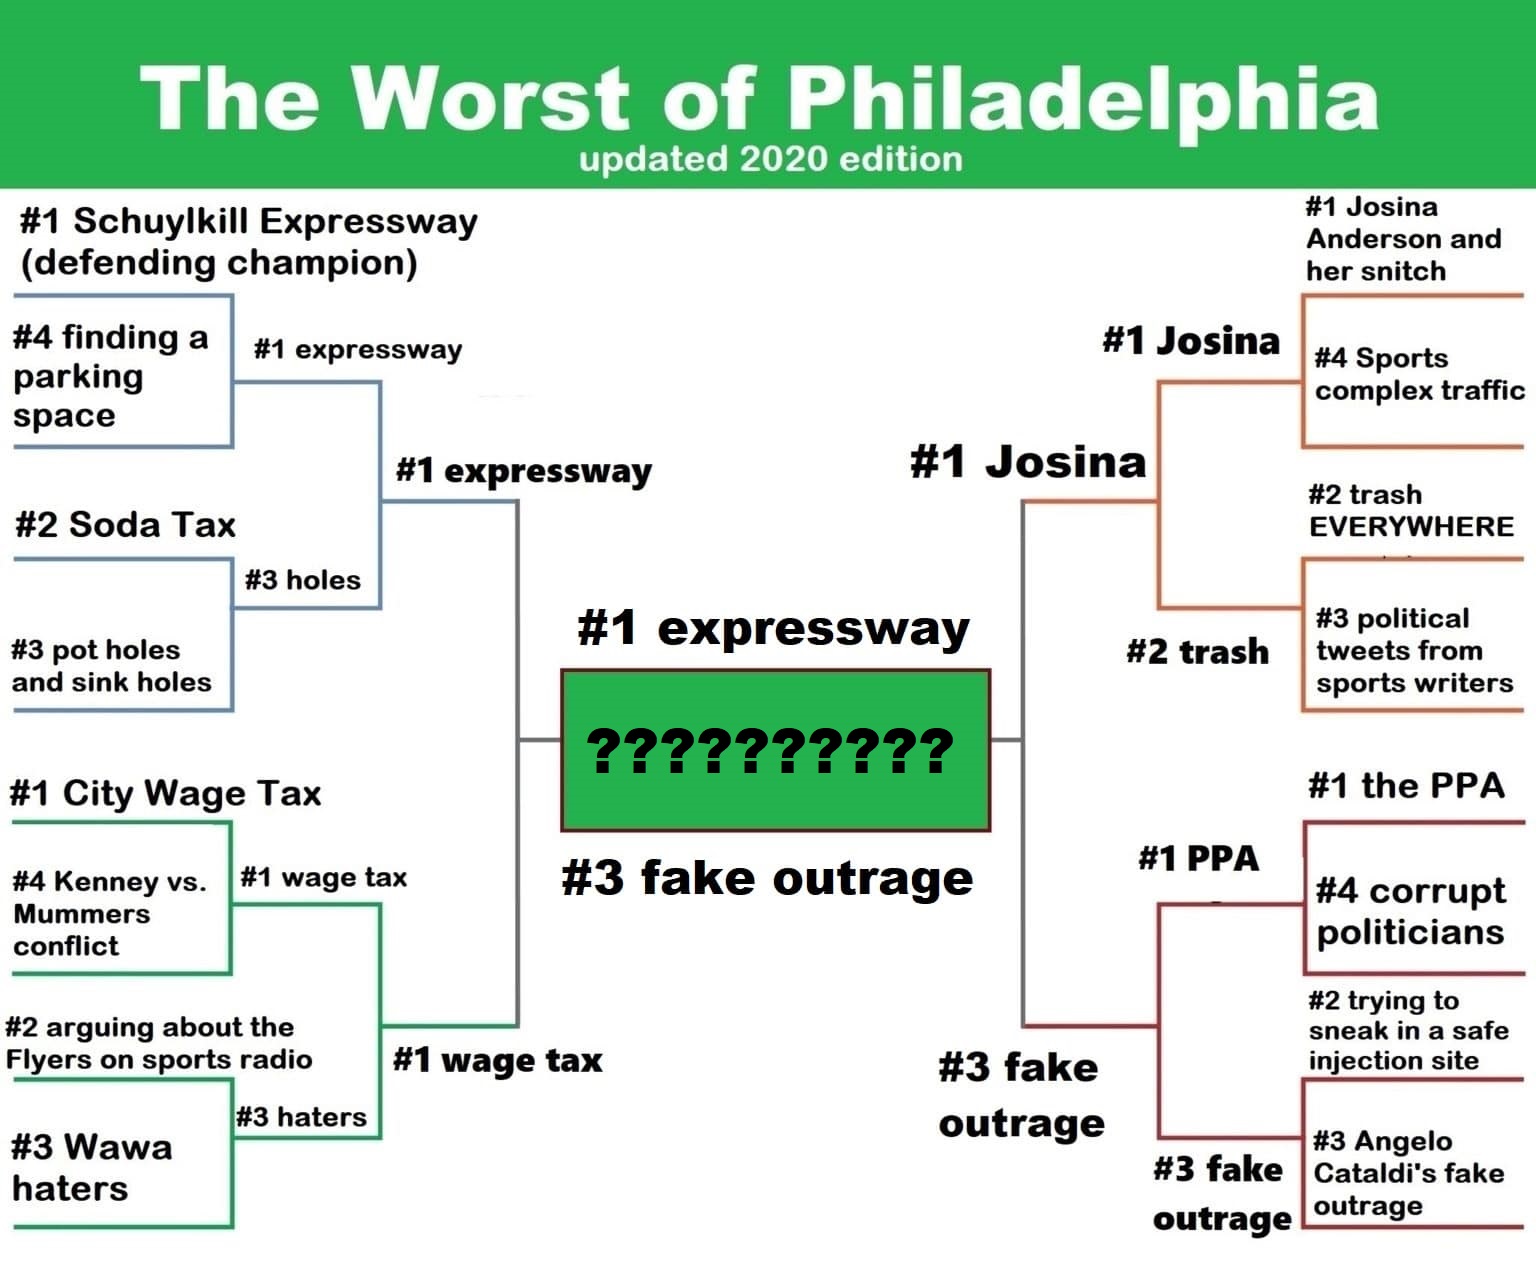 The Worst of Philadelphia, 2020 Edition: We Have a Winner!